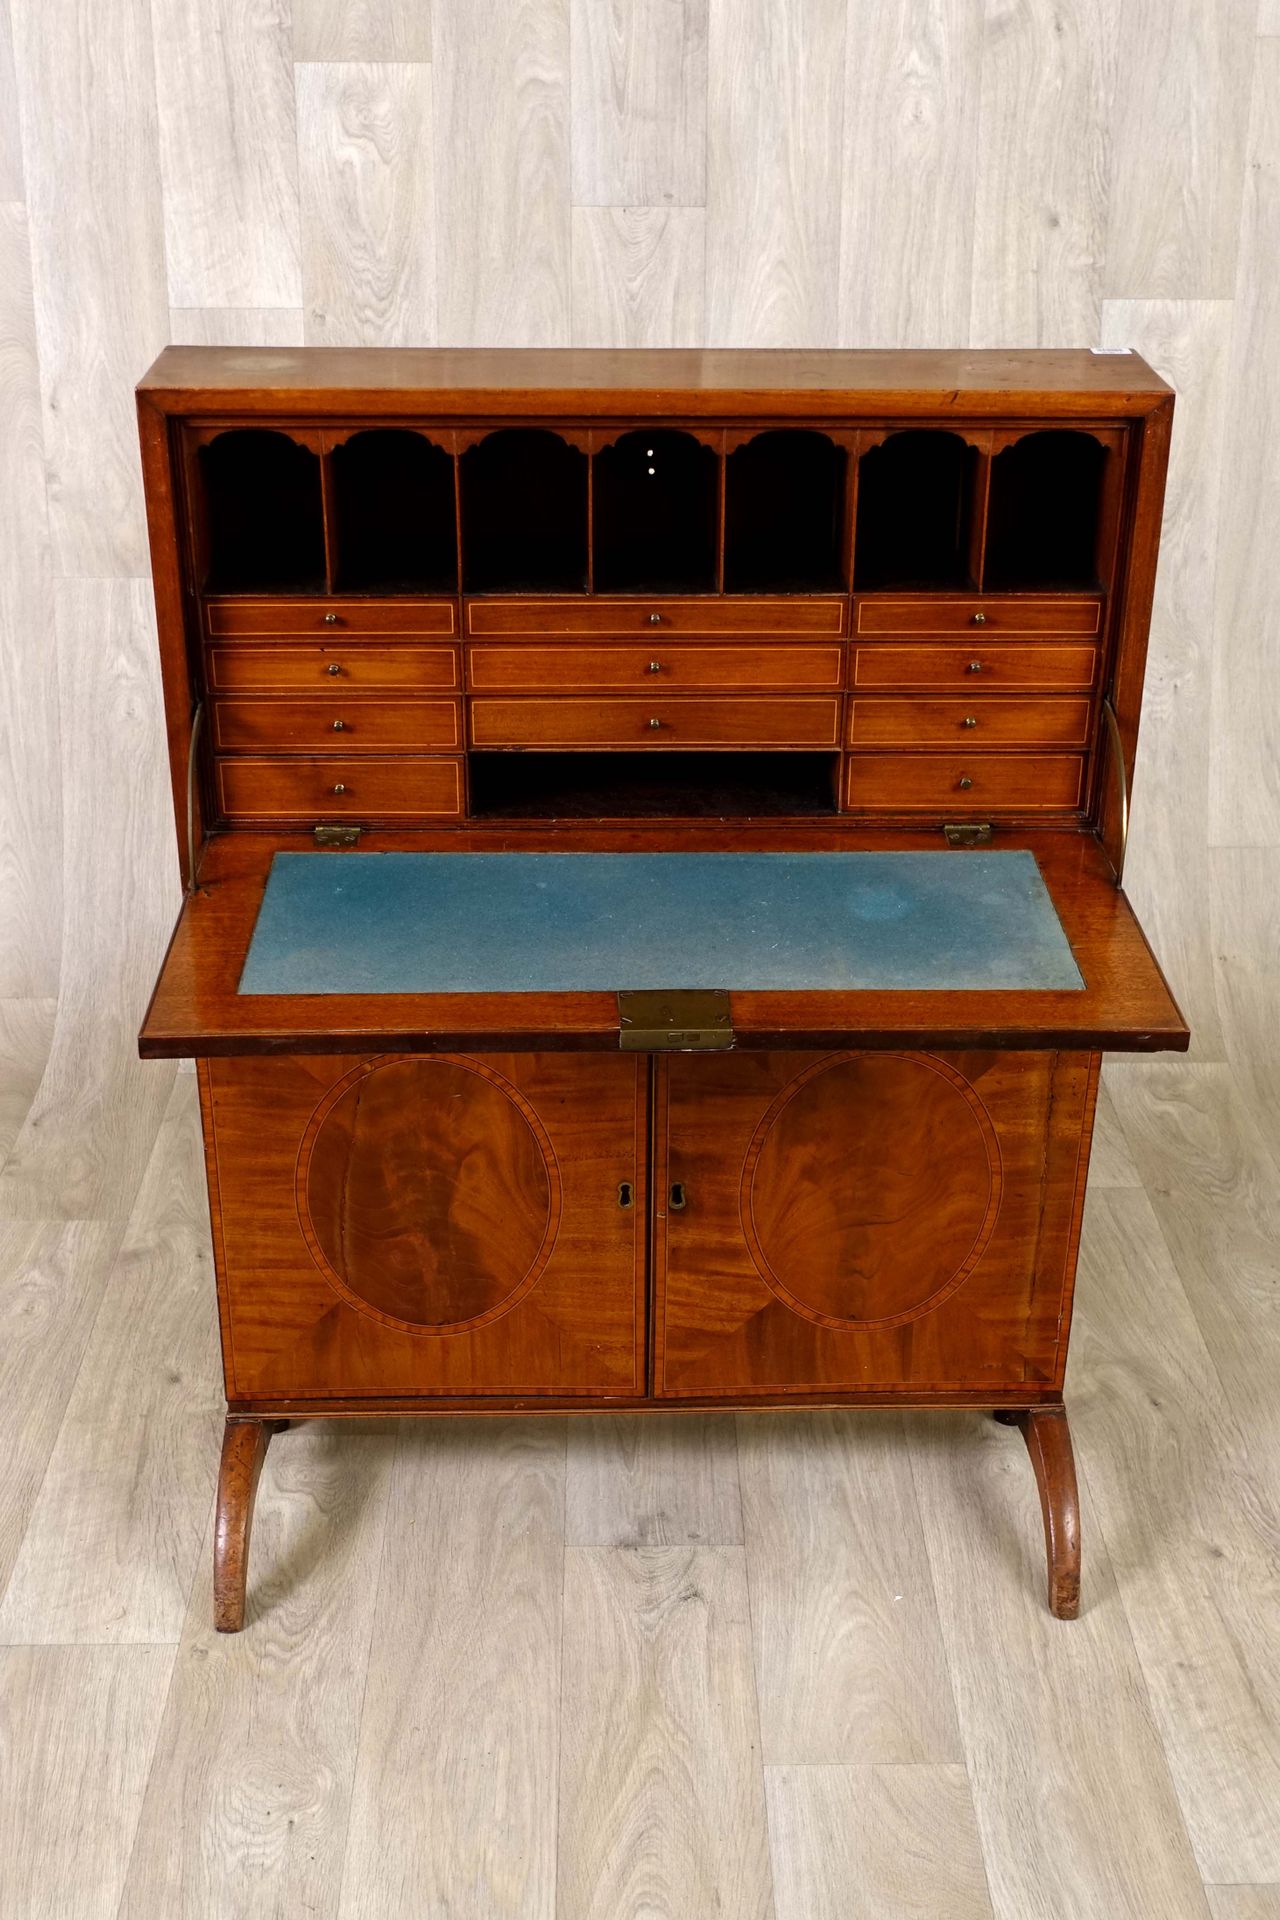 “Billet doux“ ou Writing Desk. The front has two doors and a flap forming a writ&hellip;